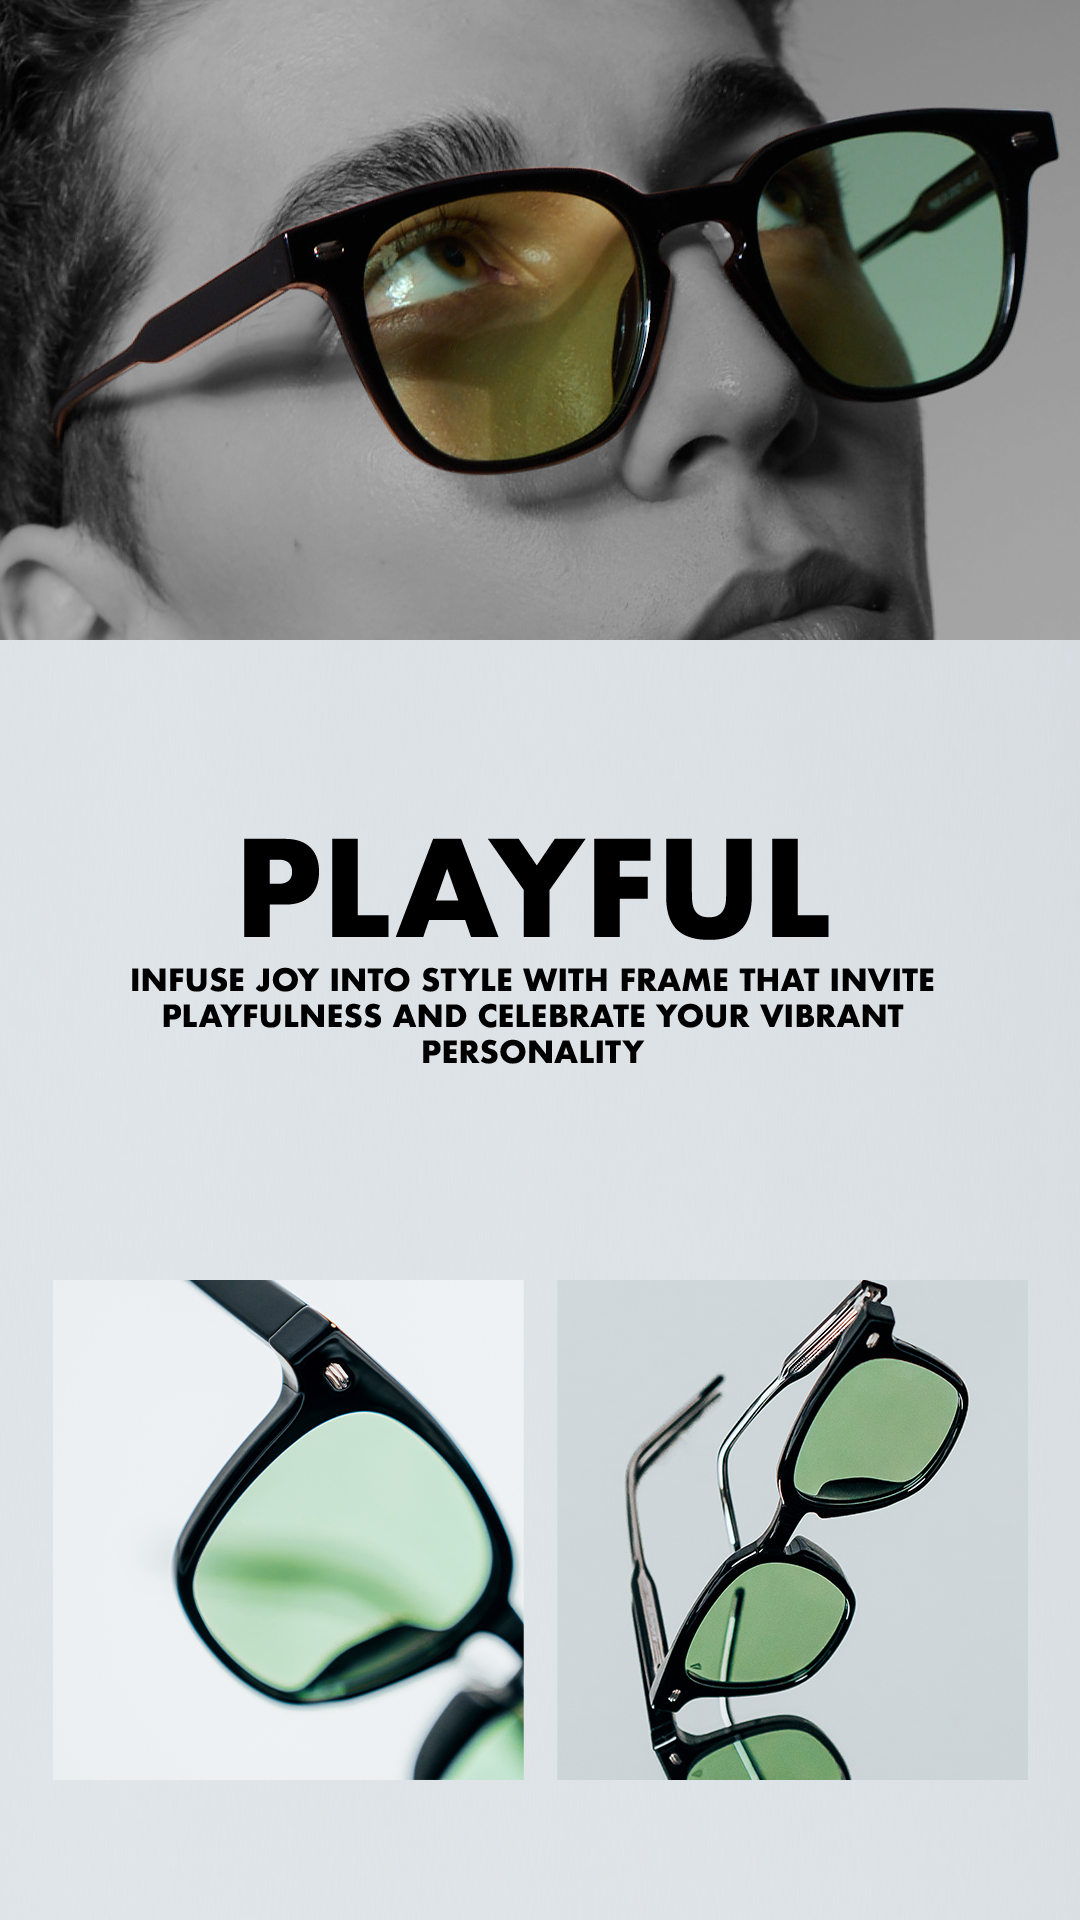 Playful - Infuse joy into style with frame that invite playfulness and celebrate your vibrant personality